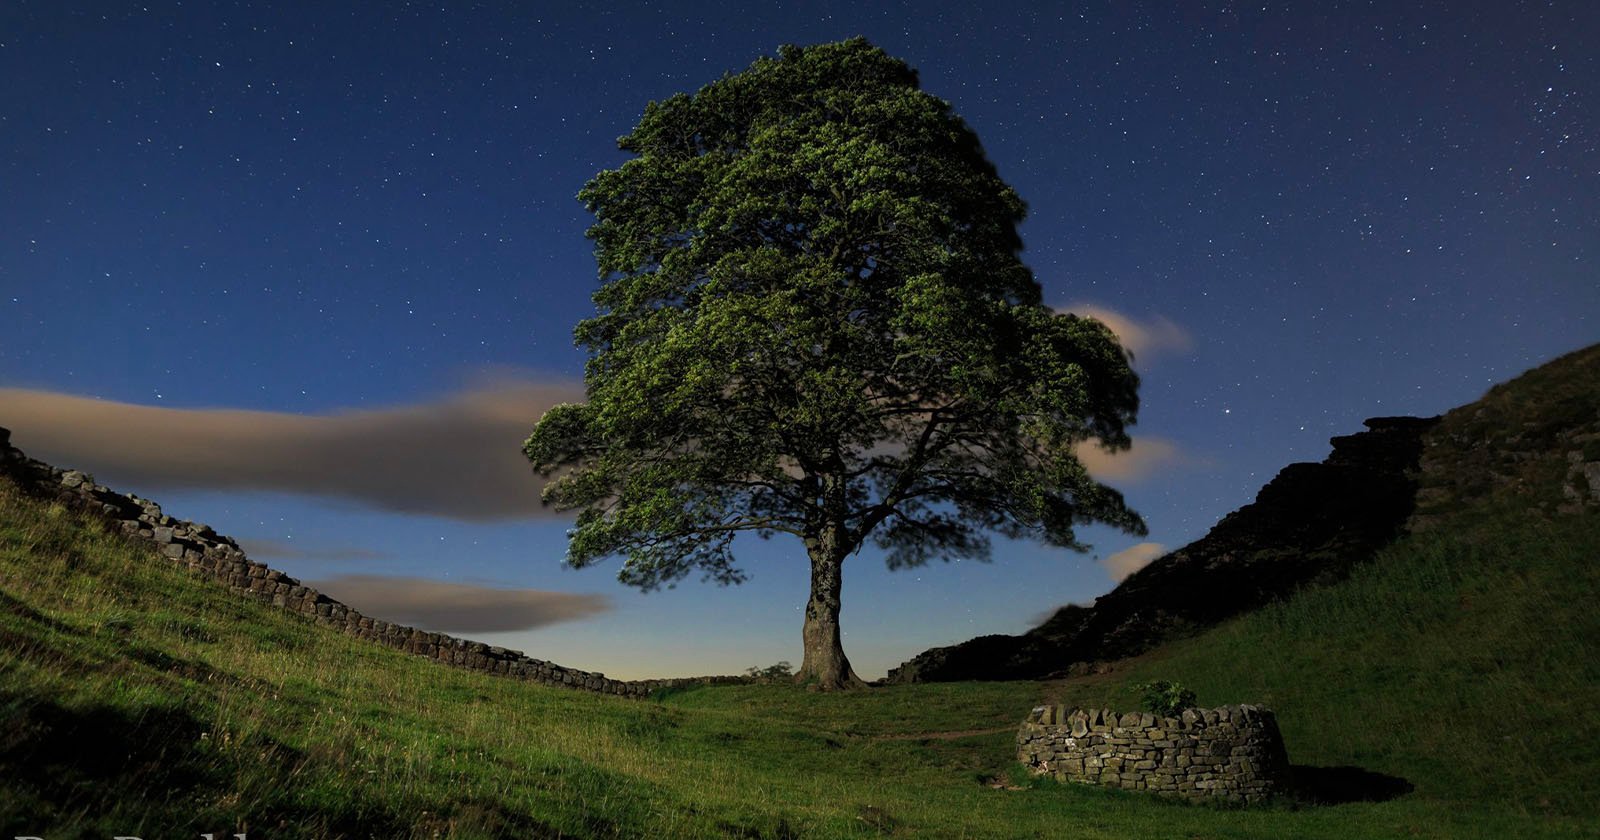  photographers left devastated after iconic tree cut down 